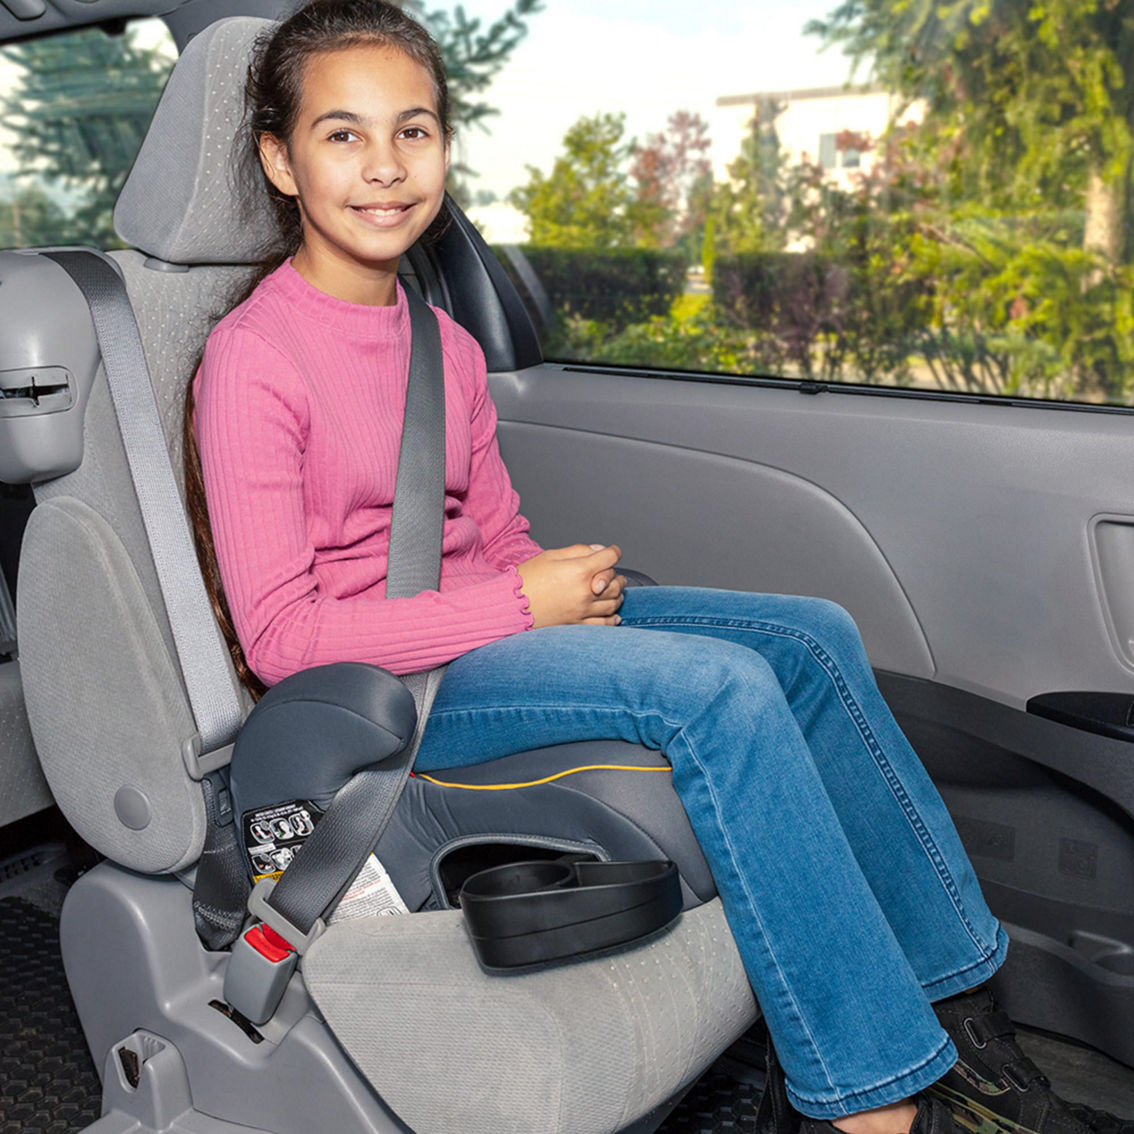 Diono Monterey® 2XT Latch 2-in-1 Booster Car Seat Plum - Image 4 of 5